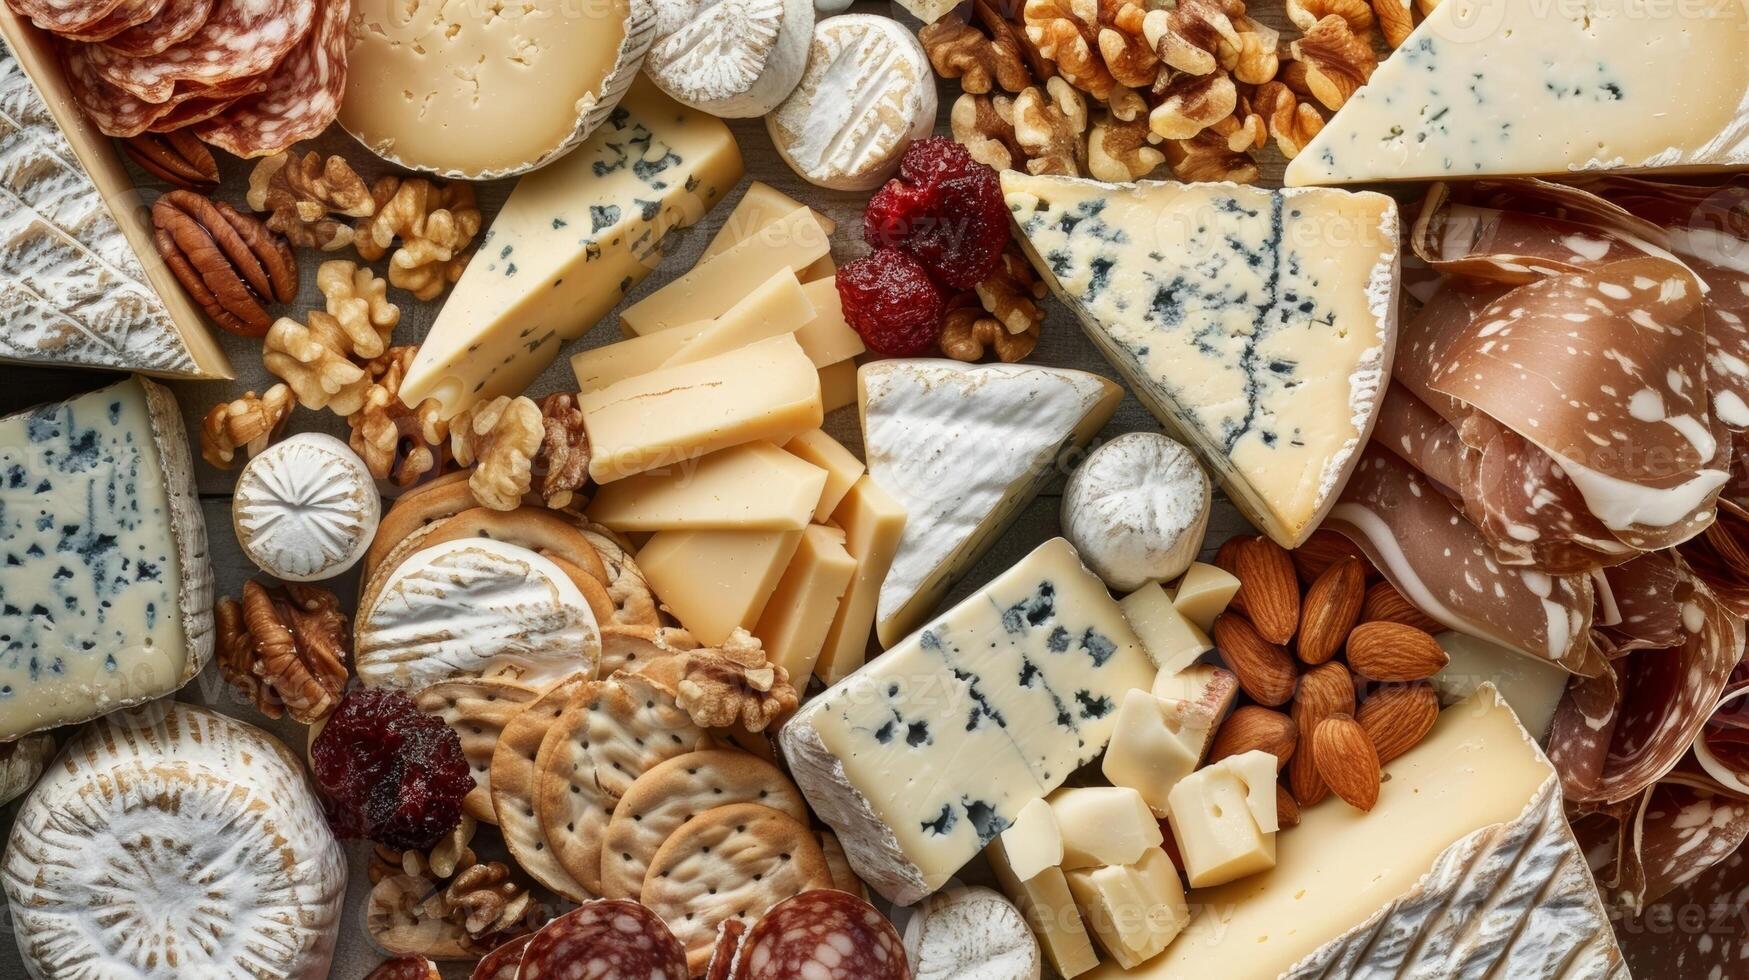 A cheese board that doubles as a work of art with an assortment of unique and flavorful options including creamy goat cheese tangy blue cheese and aged Manchego surrounded by s of juic photo